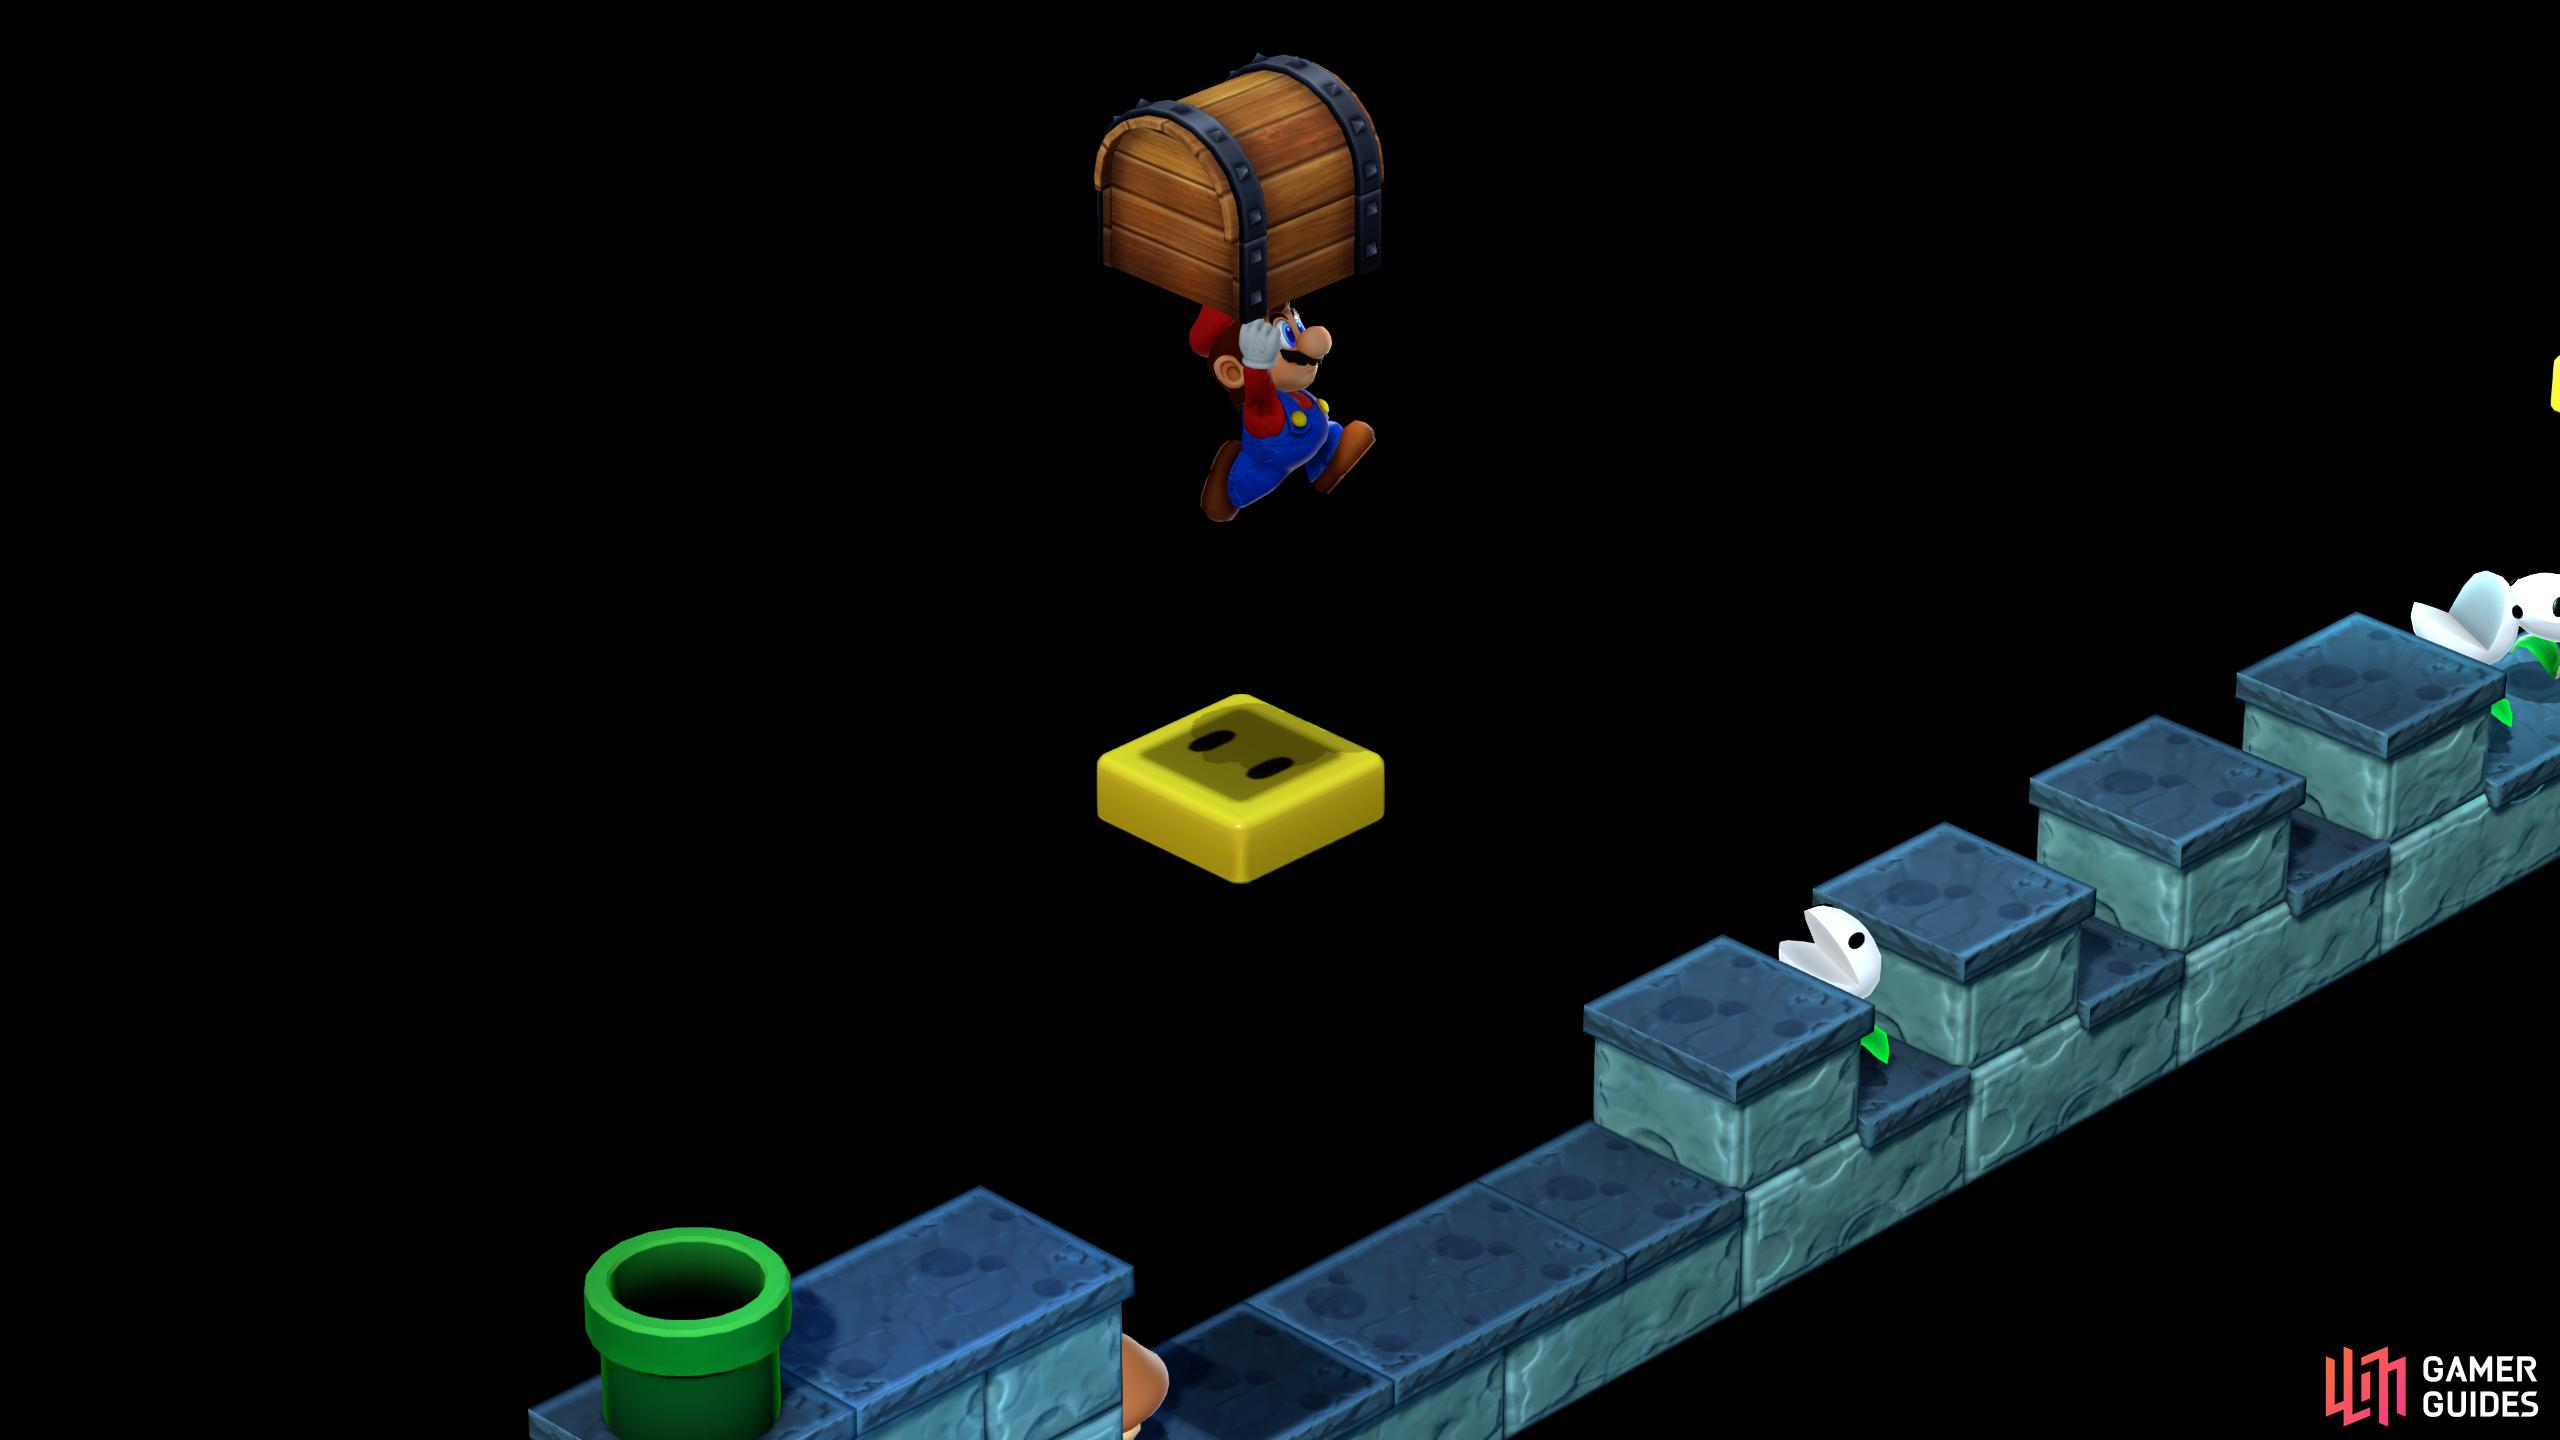 In the next room, jump on the yellow block and jump to reach the chest.